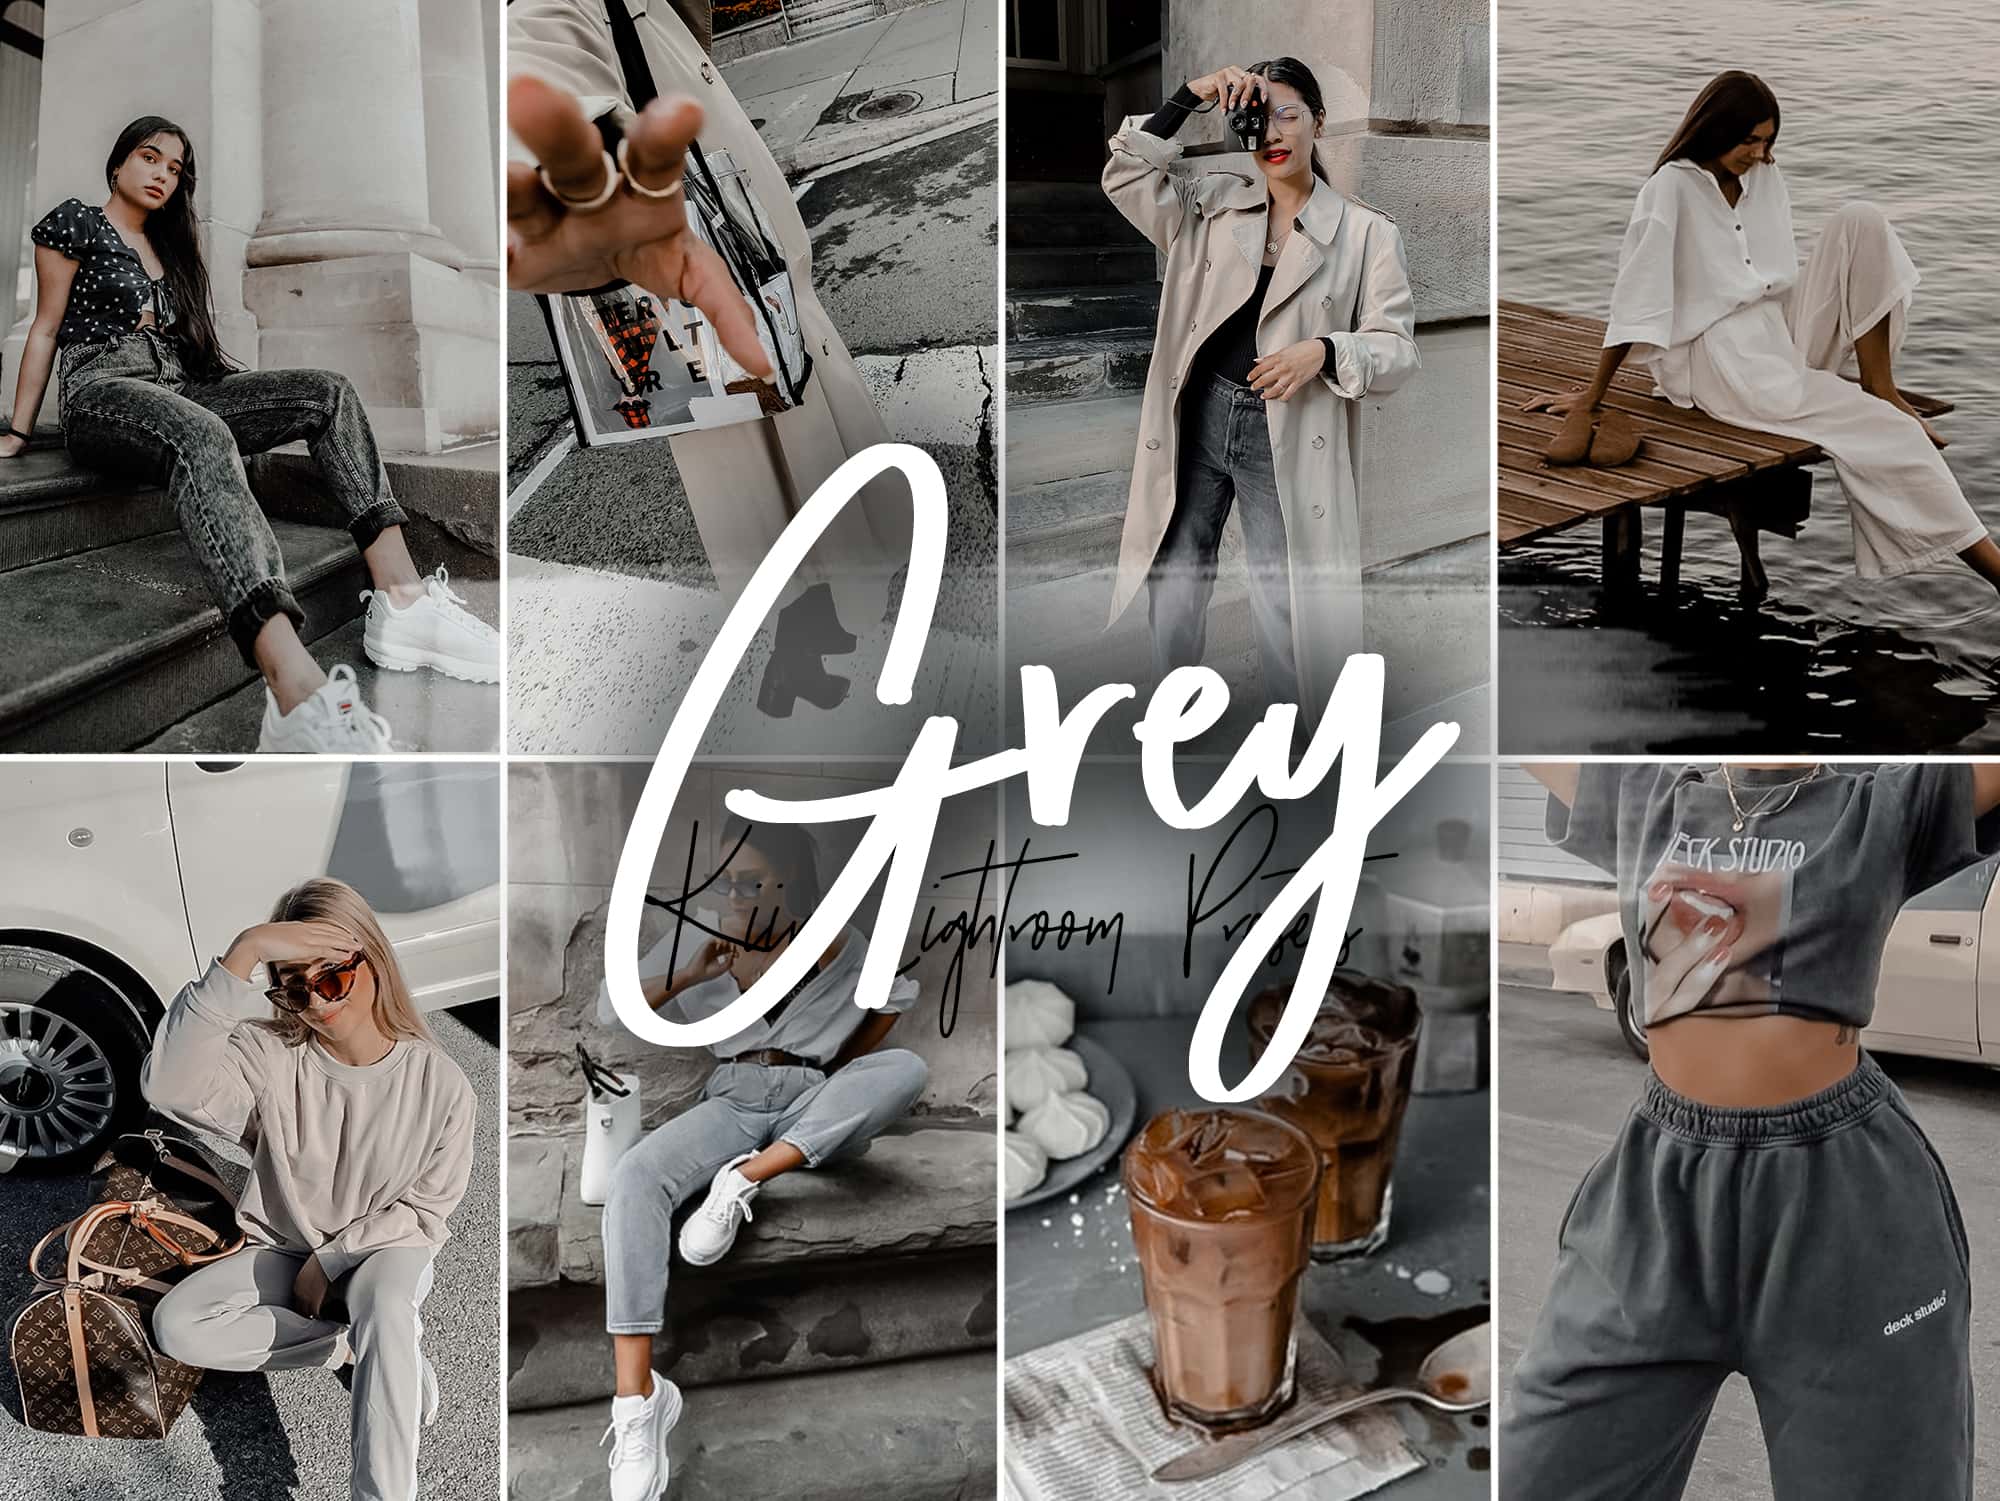 Preview of Grey Presets collection from PresetLove, featuring a before and after comparison of a photo edited with one of the presets.